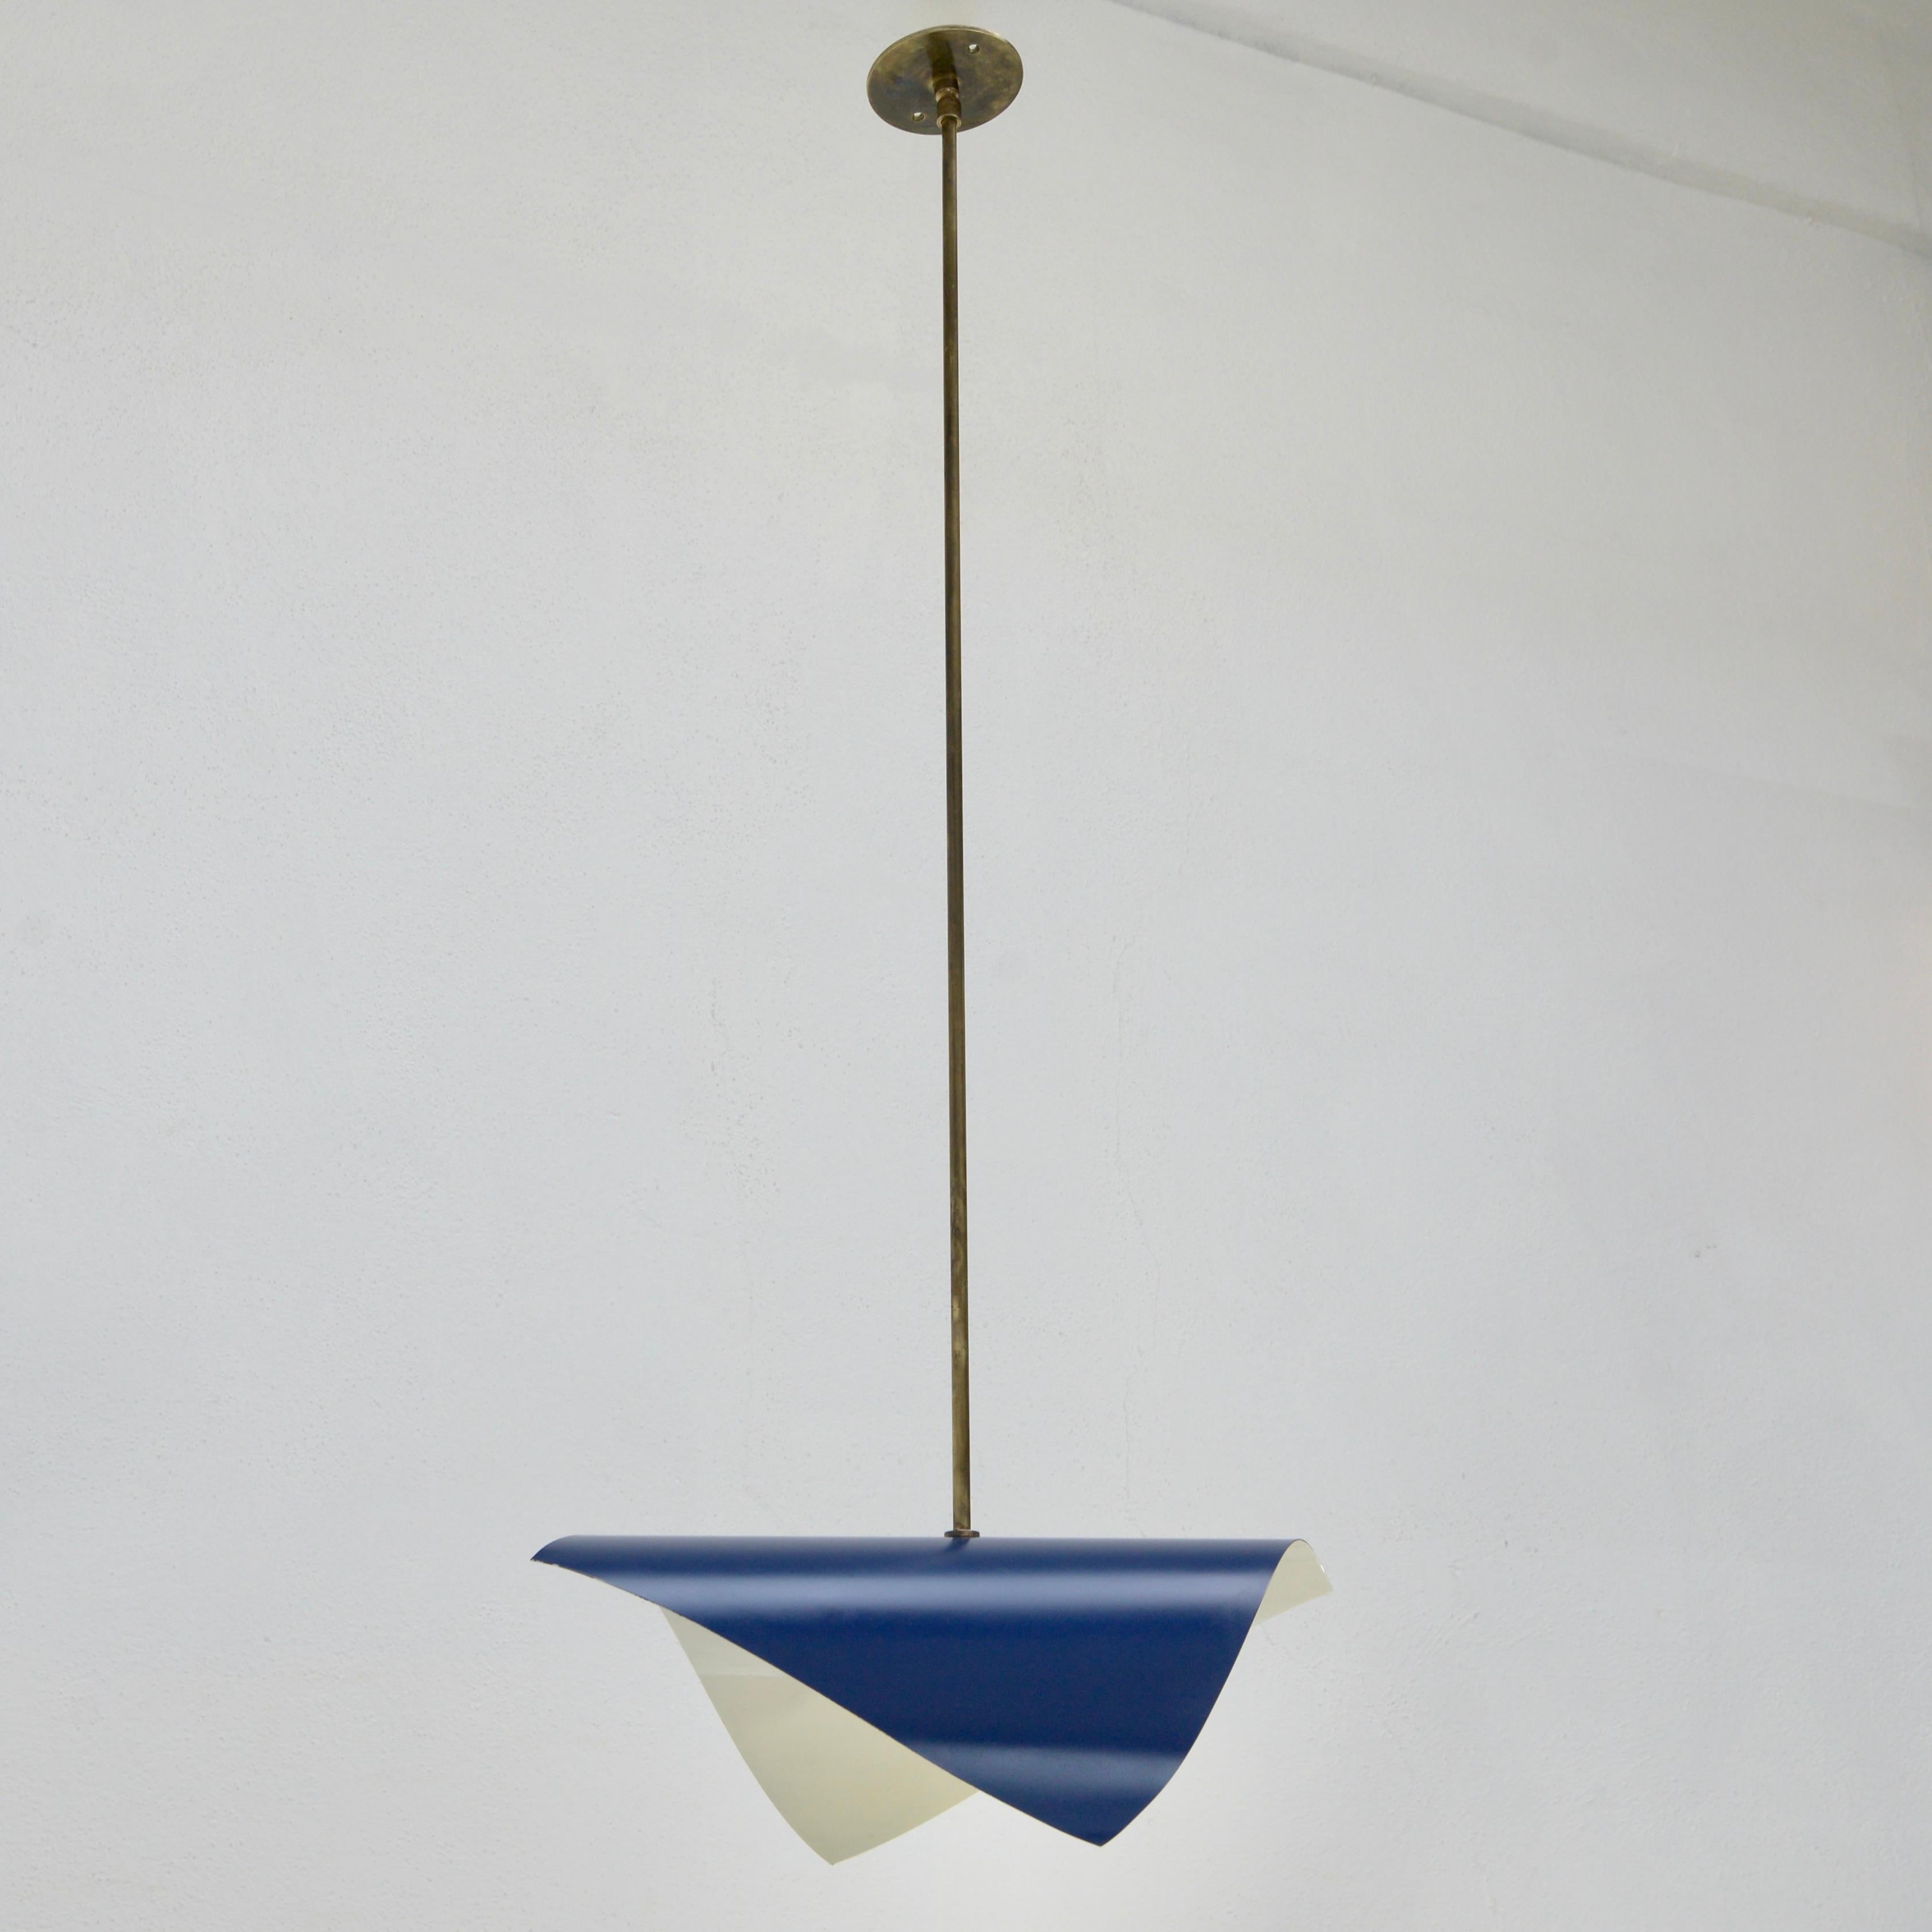 (3) Wonderful steel and brass blue Italian folding pendants. Partially restored, midcentury pendants from Italy. With 1-E26 medium based socket each pendant and wired for use in the US. Light bulb(s) included with order. Priced